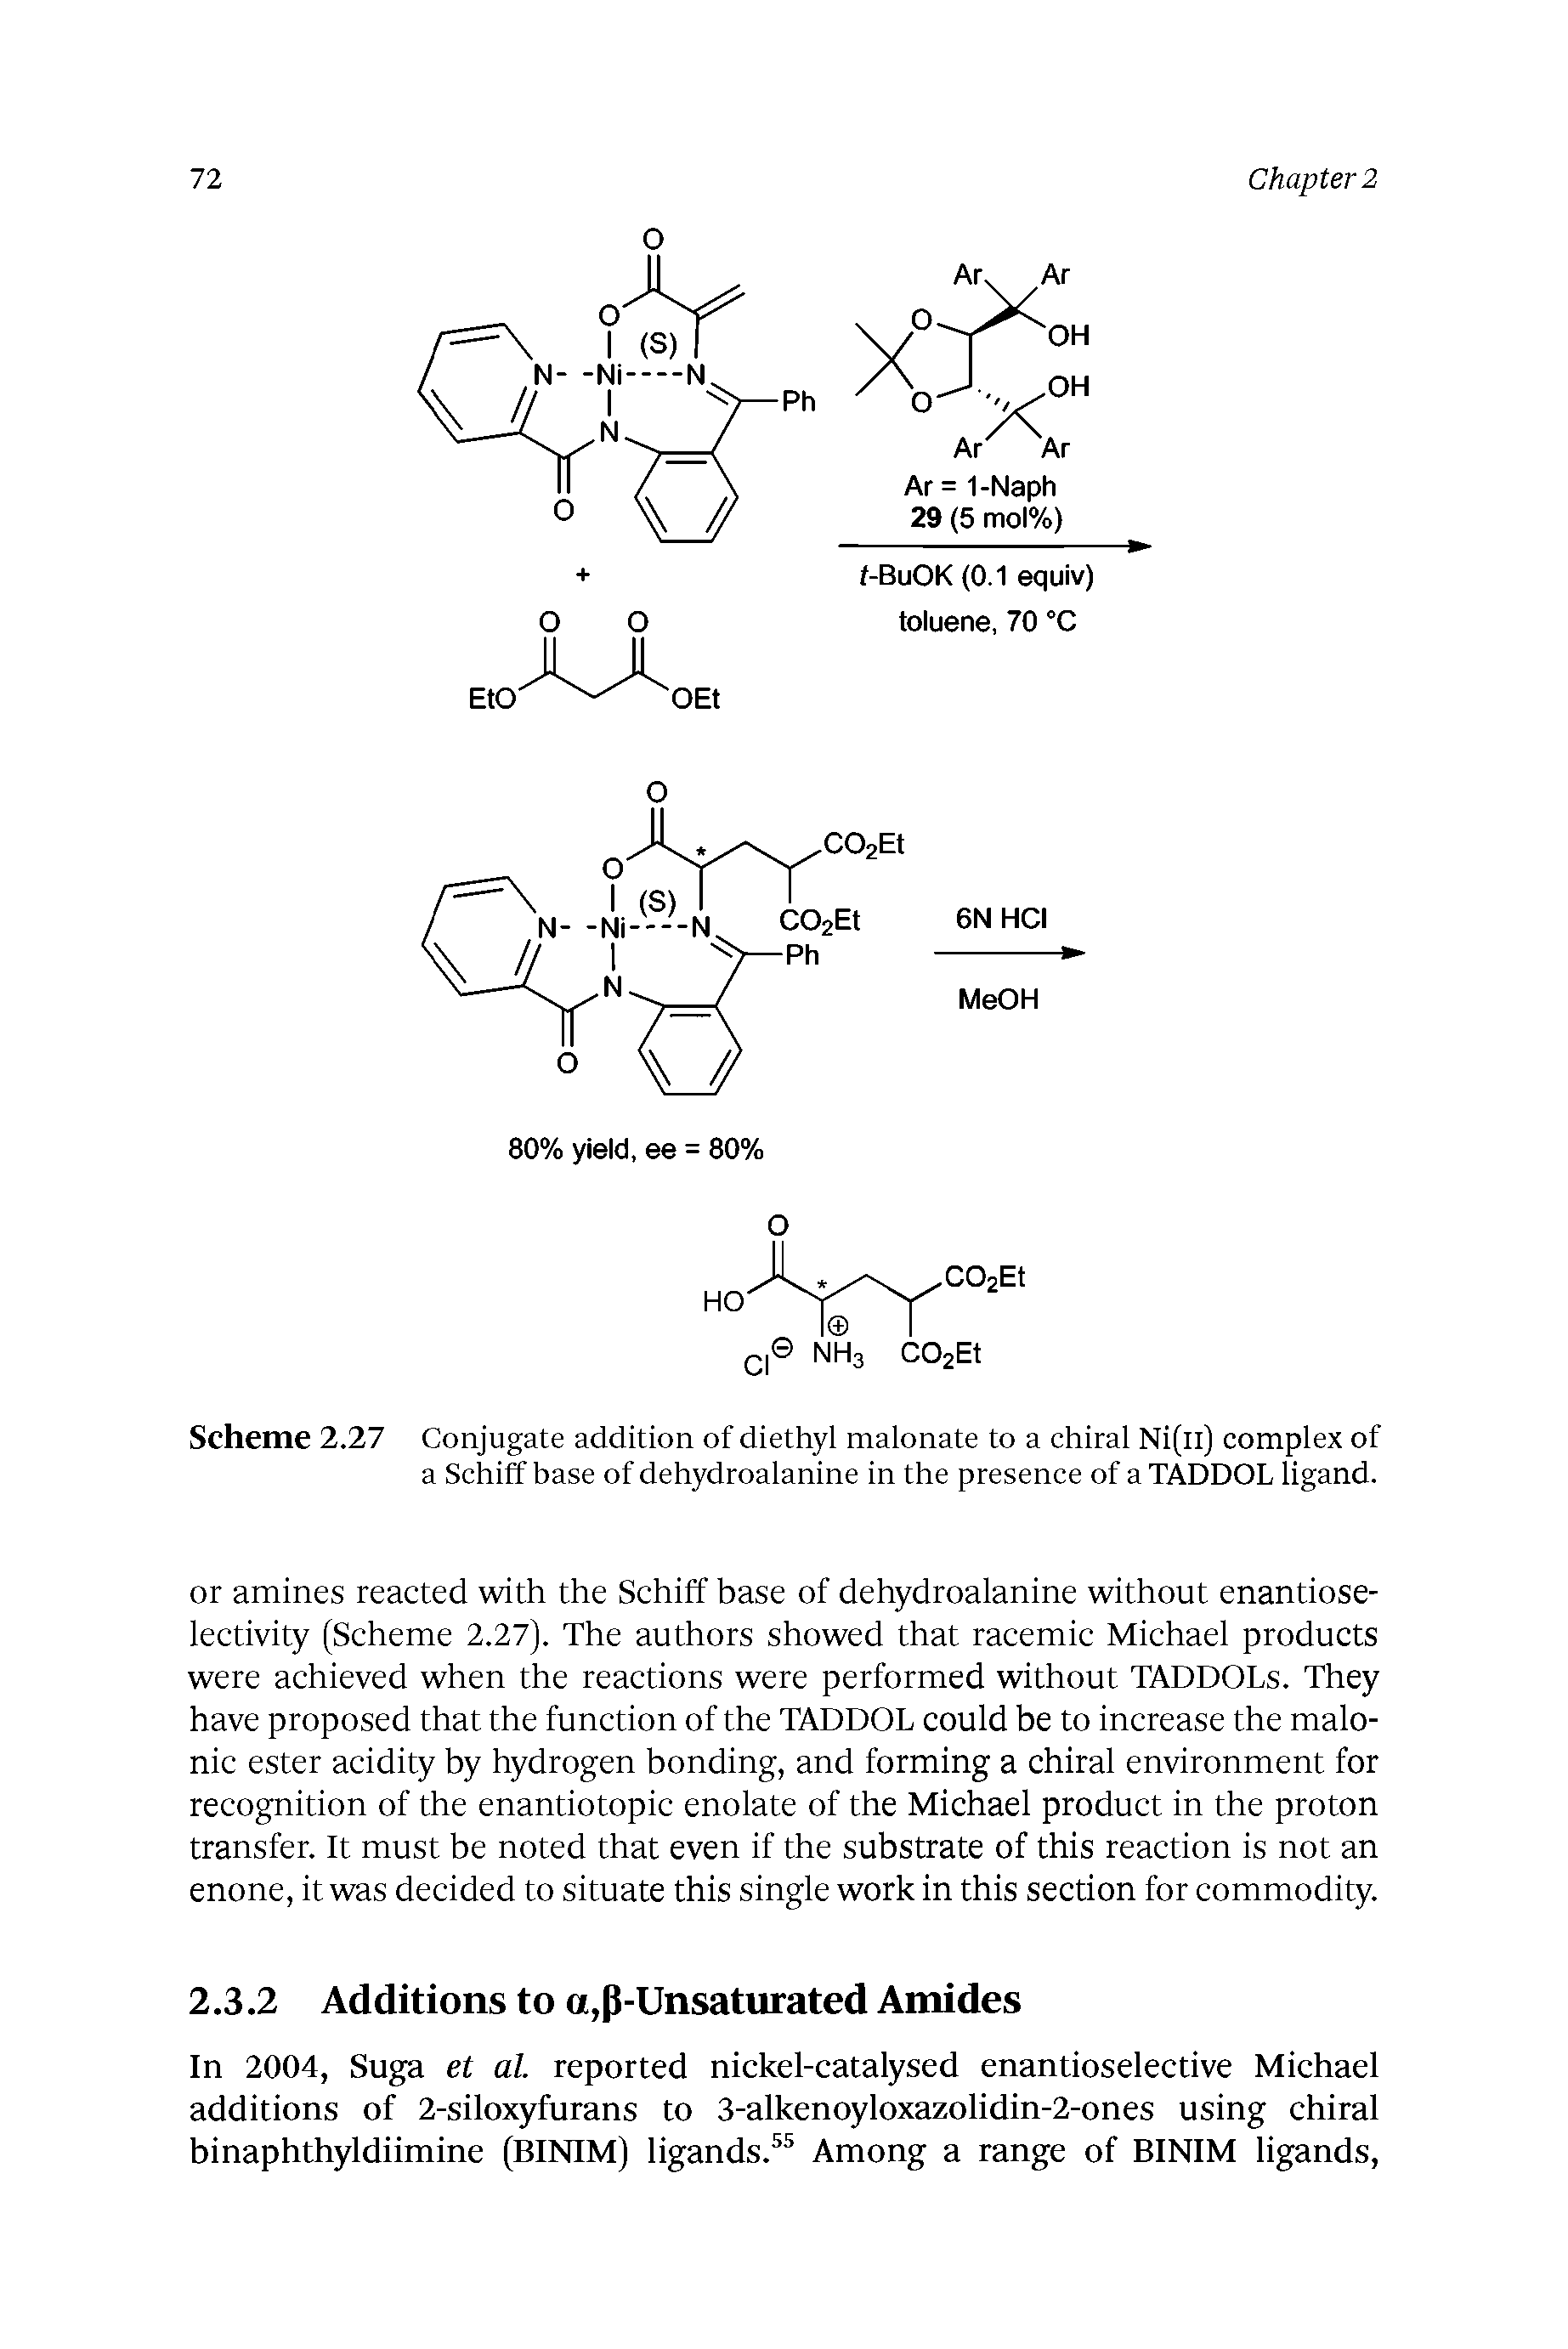 Scheme 2.27 Conjugate addition of diethyl malonate to a chiral Ni(ii) complex of a Schiff base of dehydroalanine in the presence of a TADDOL ligand.